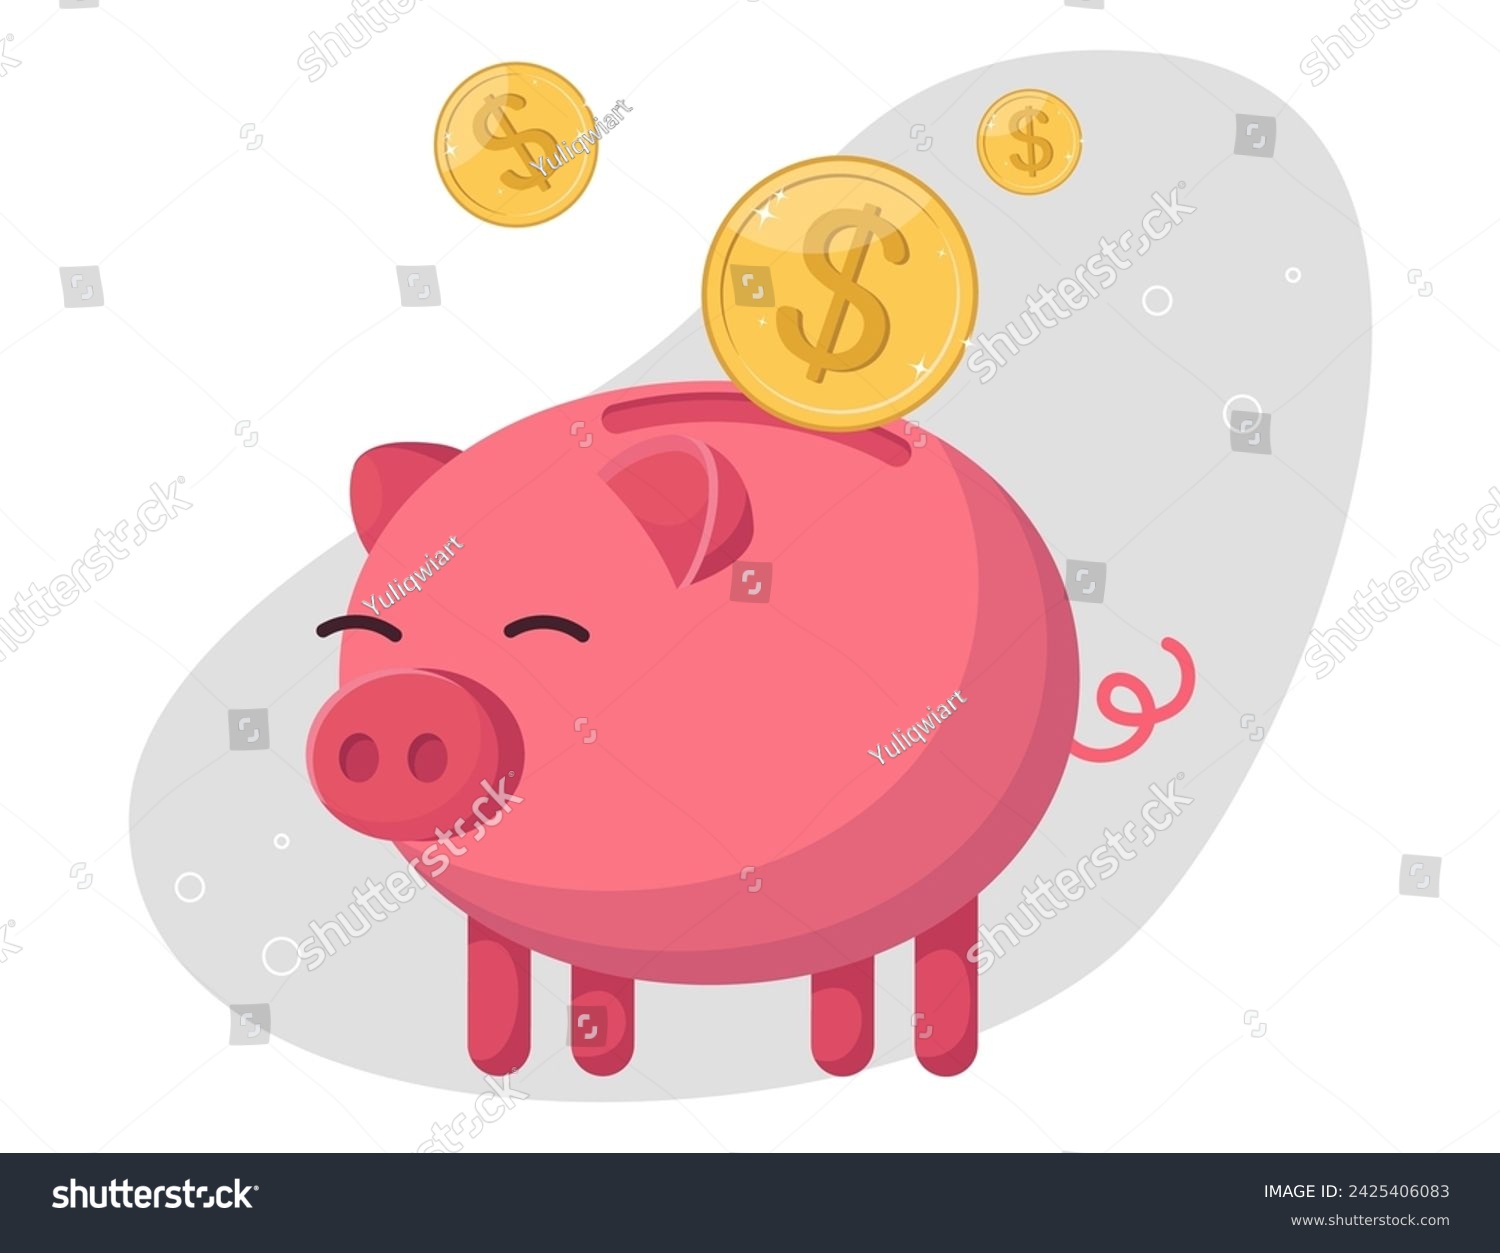 SVG of Income and salary growth, investing assets and money, creating an investment portfolio and deposit, managing money, improving the economy and market, increase in savings, coins fall into a piggy bank. svg